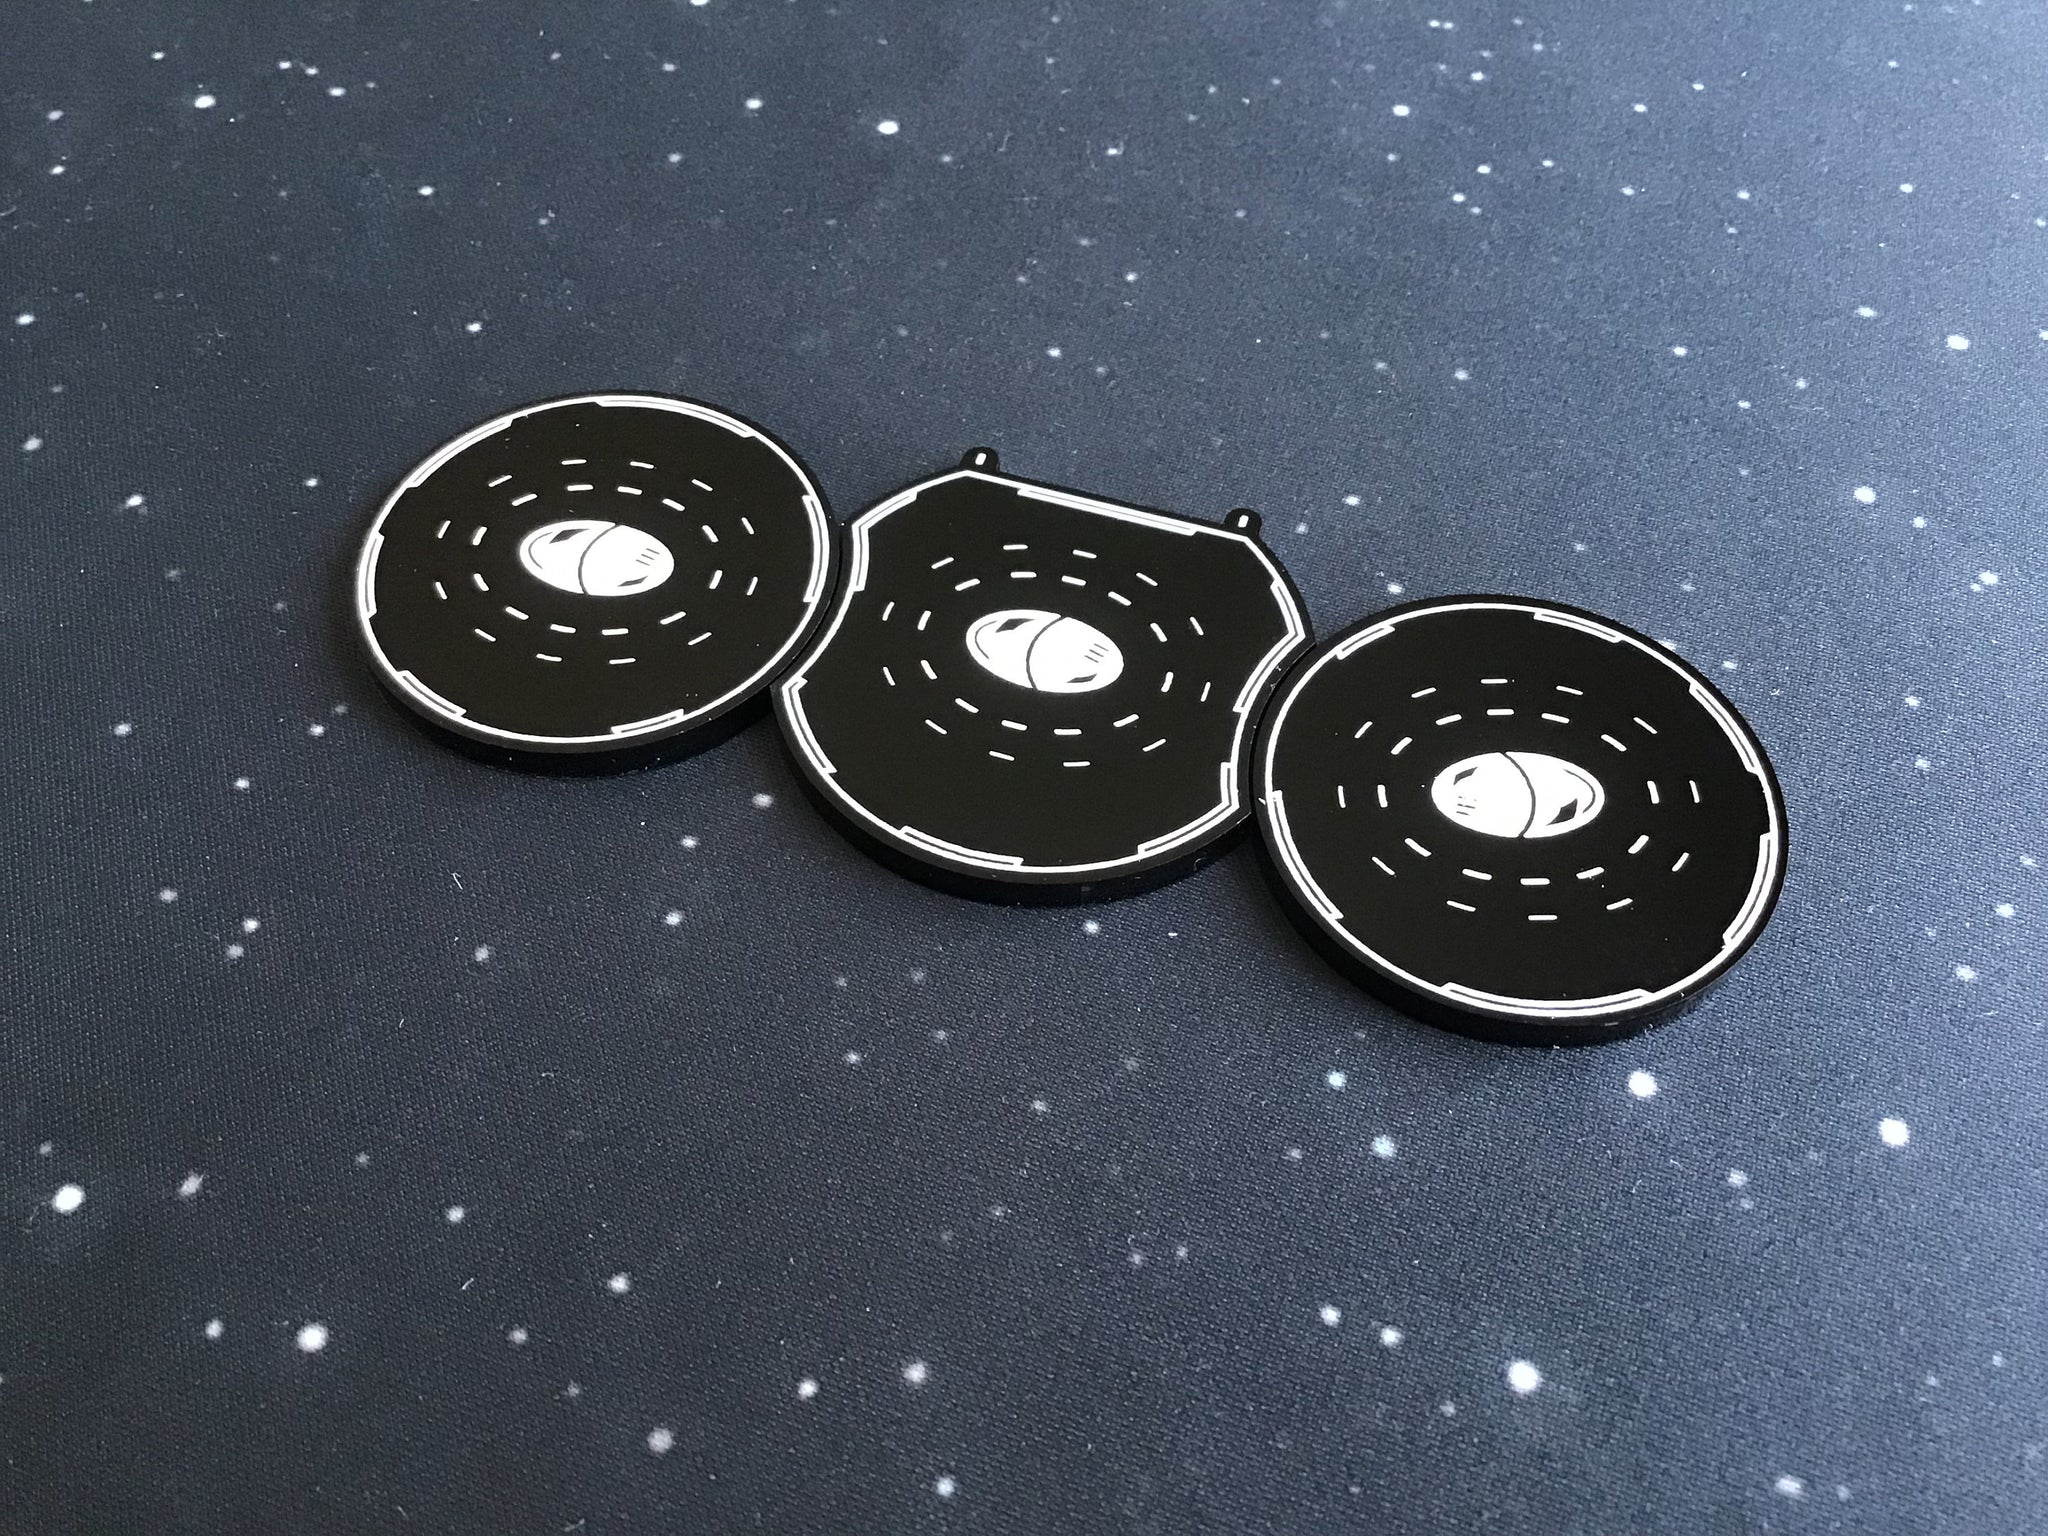 1 x Cluster Bomb Token - Star Wars X-wing Compatible